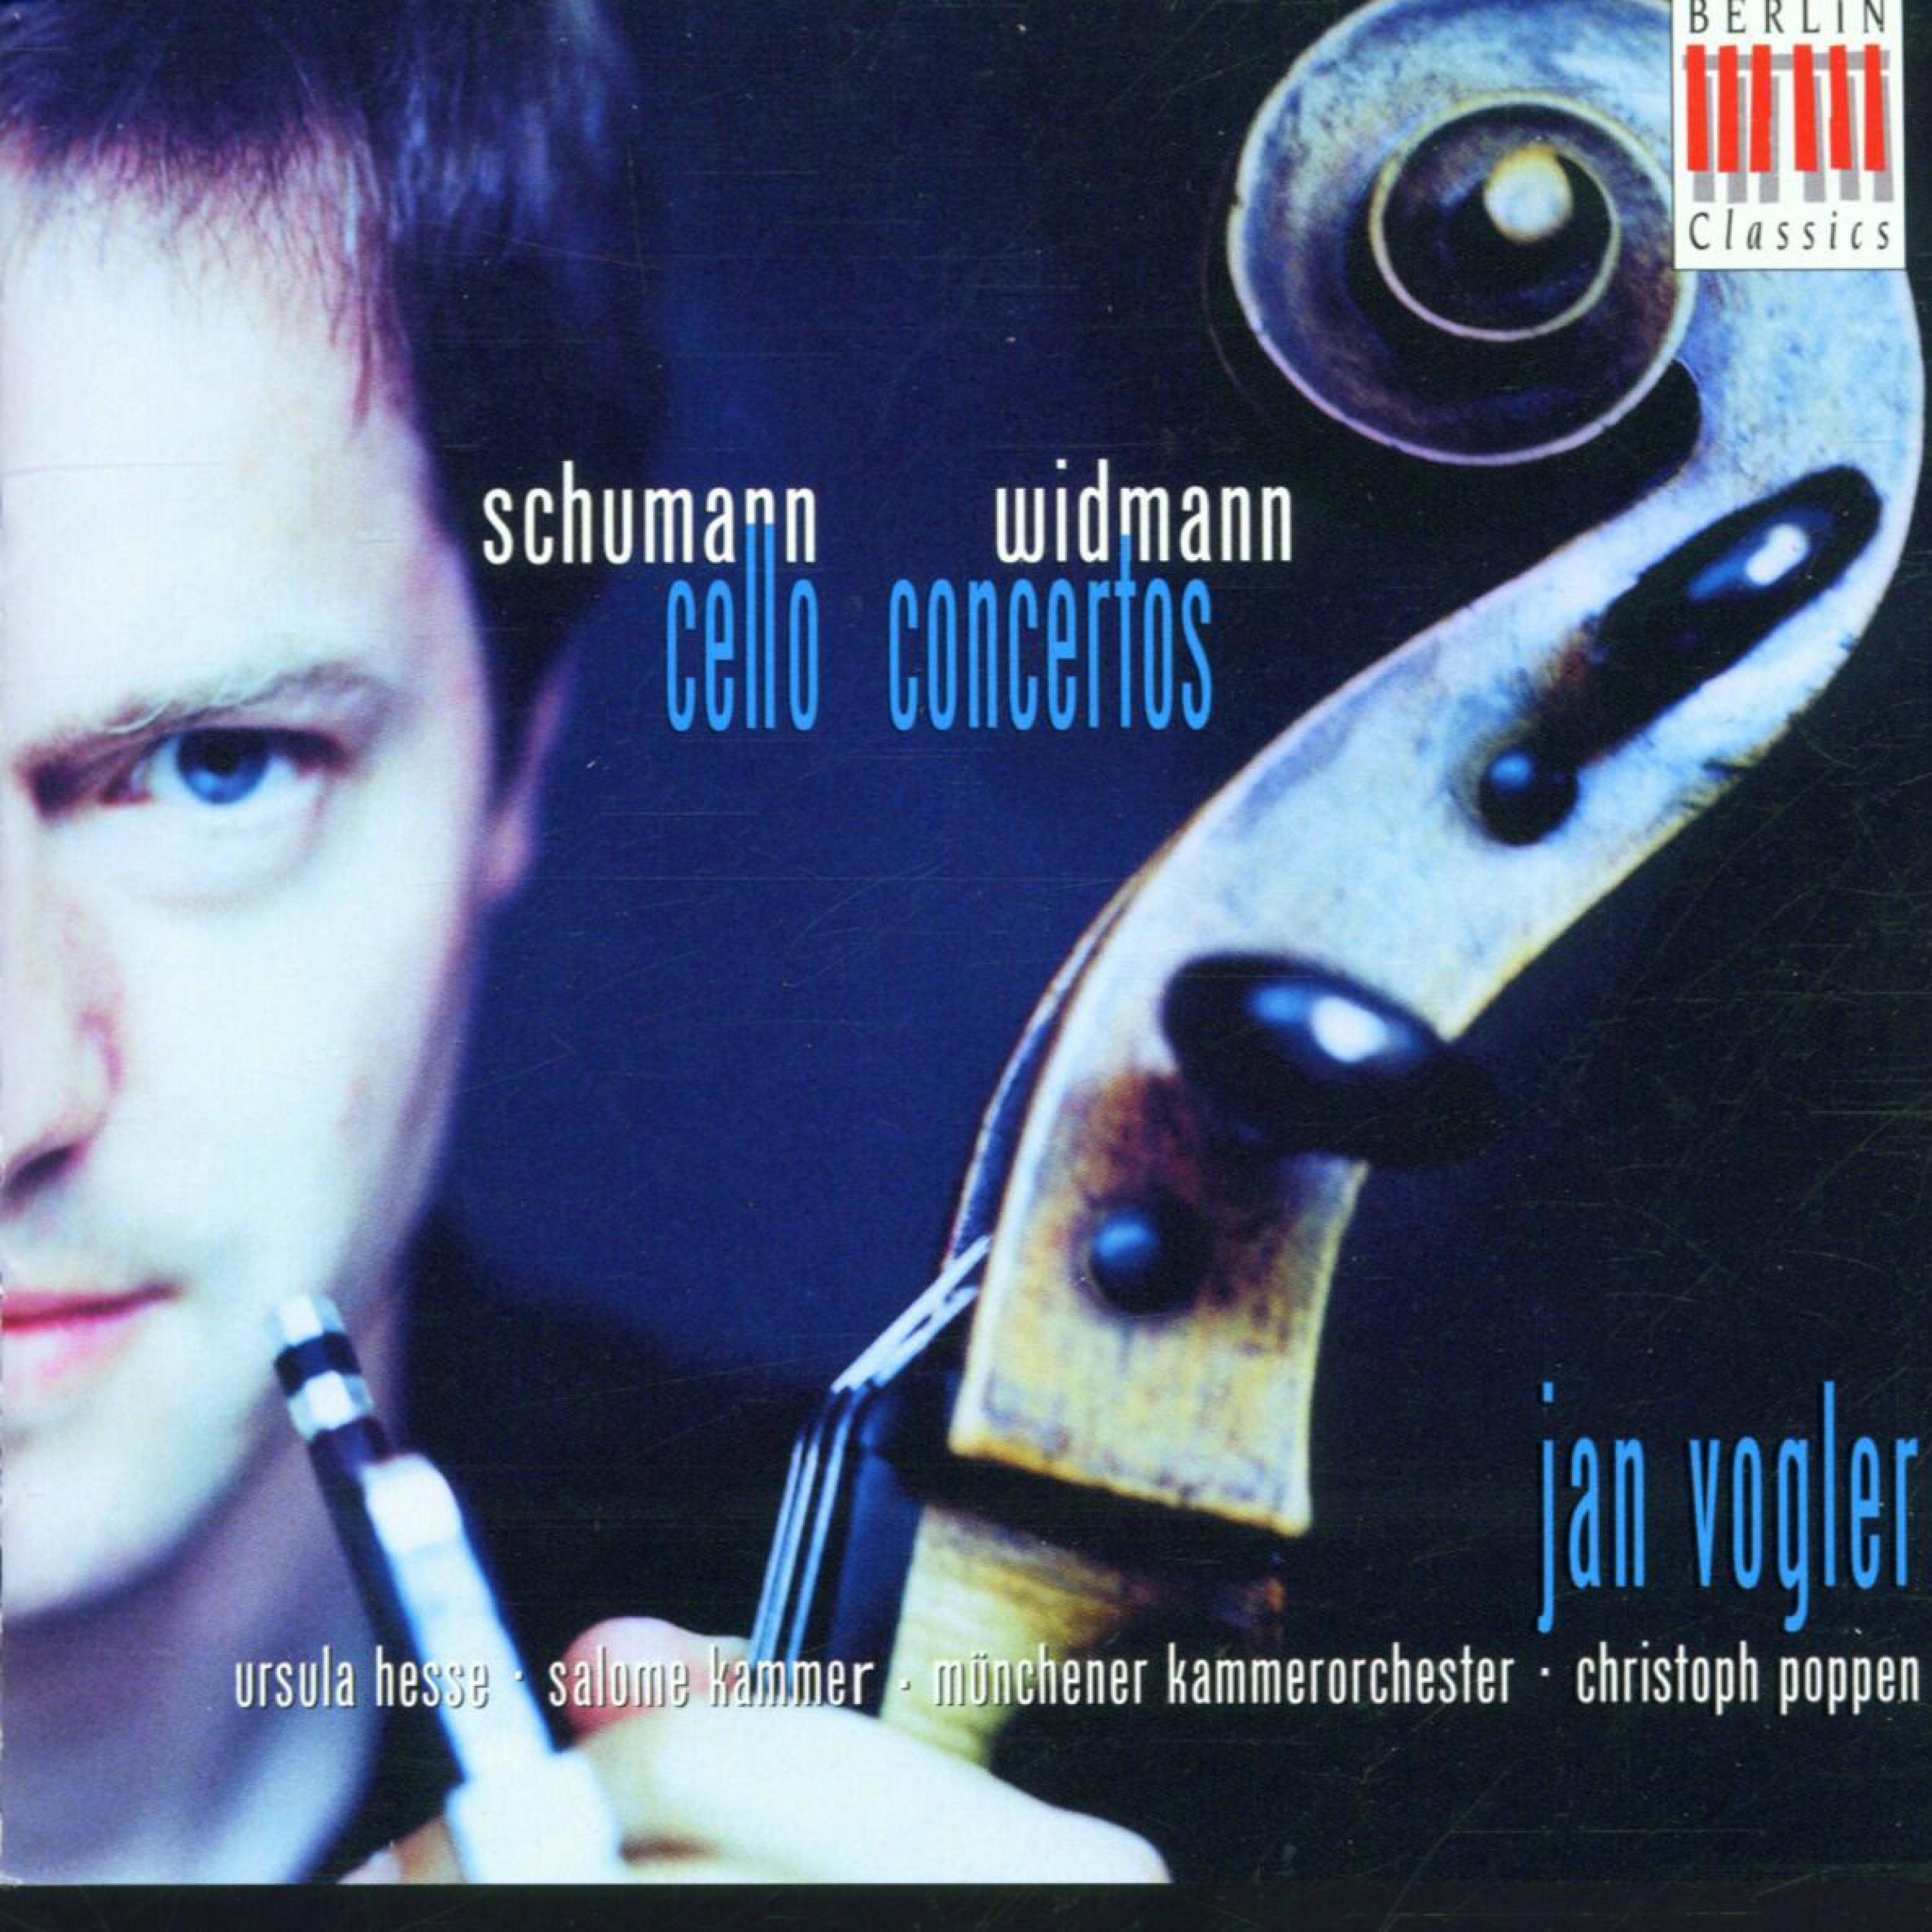 Cello Concerto in A Minor, Op. 129: III. Sehr lebhaft